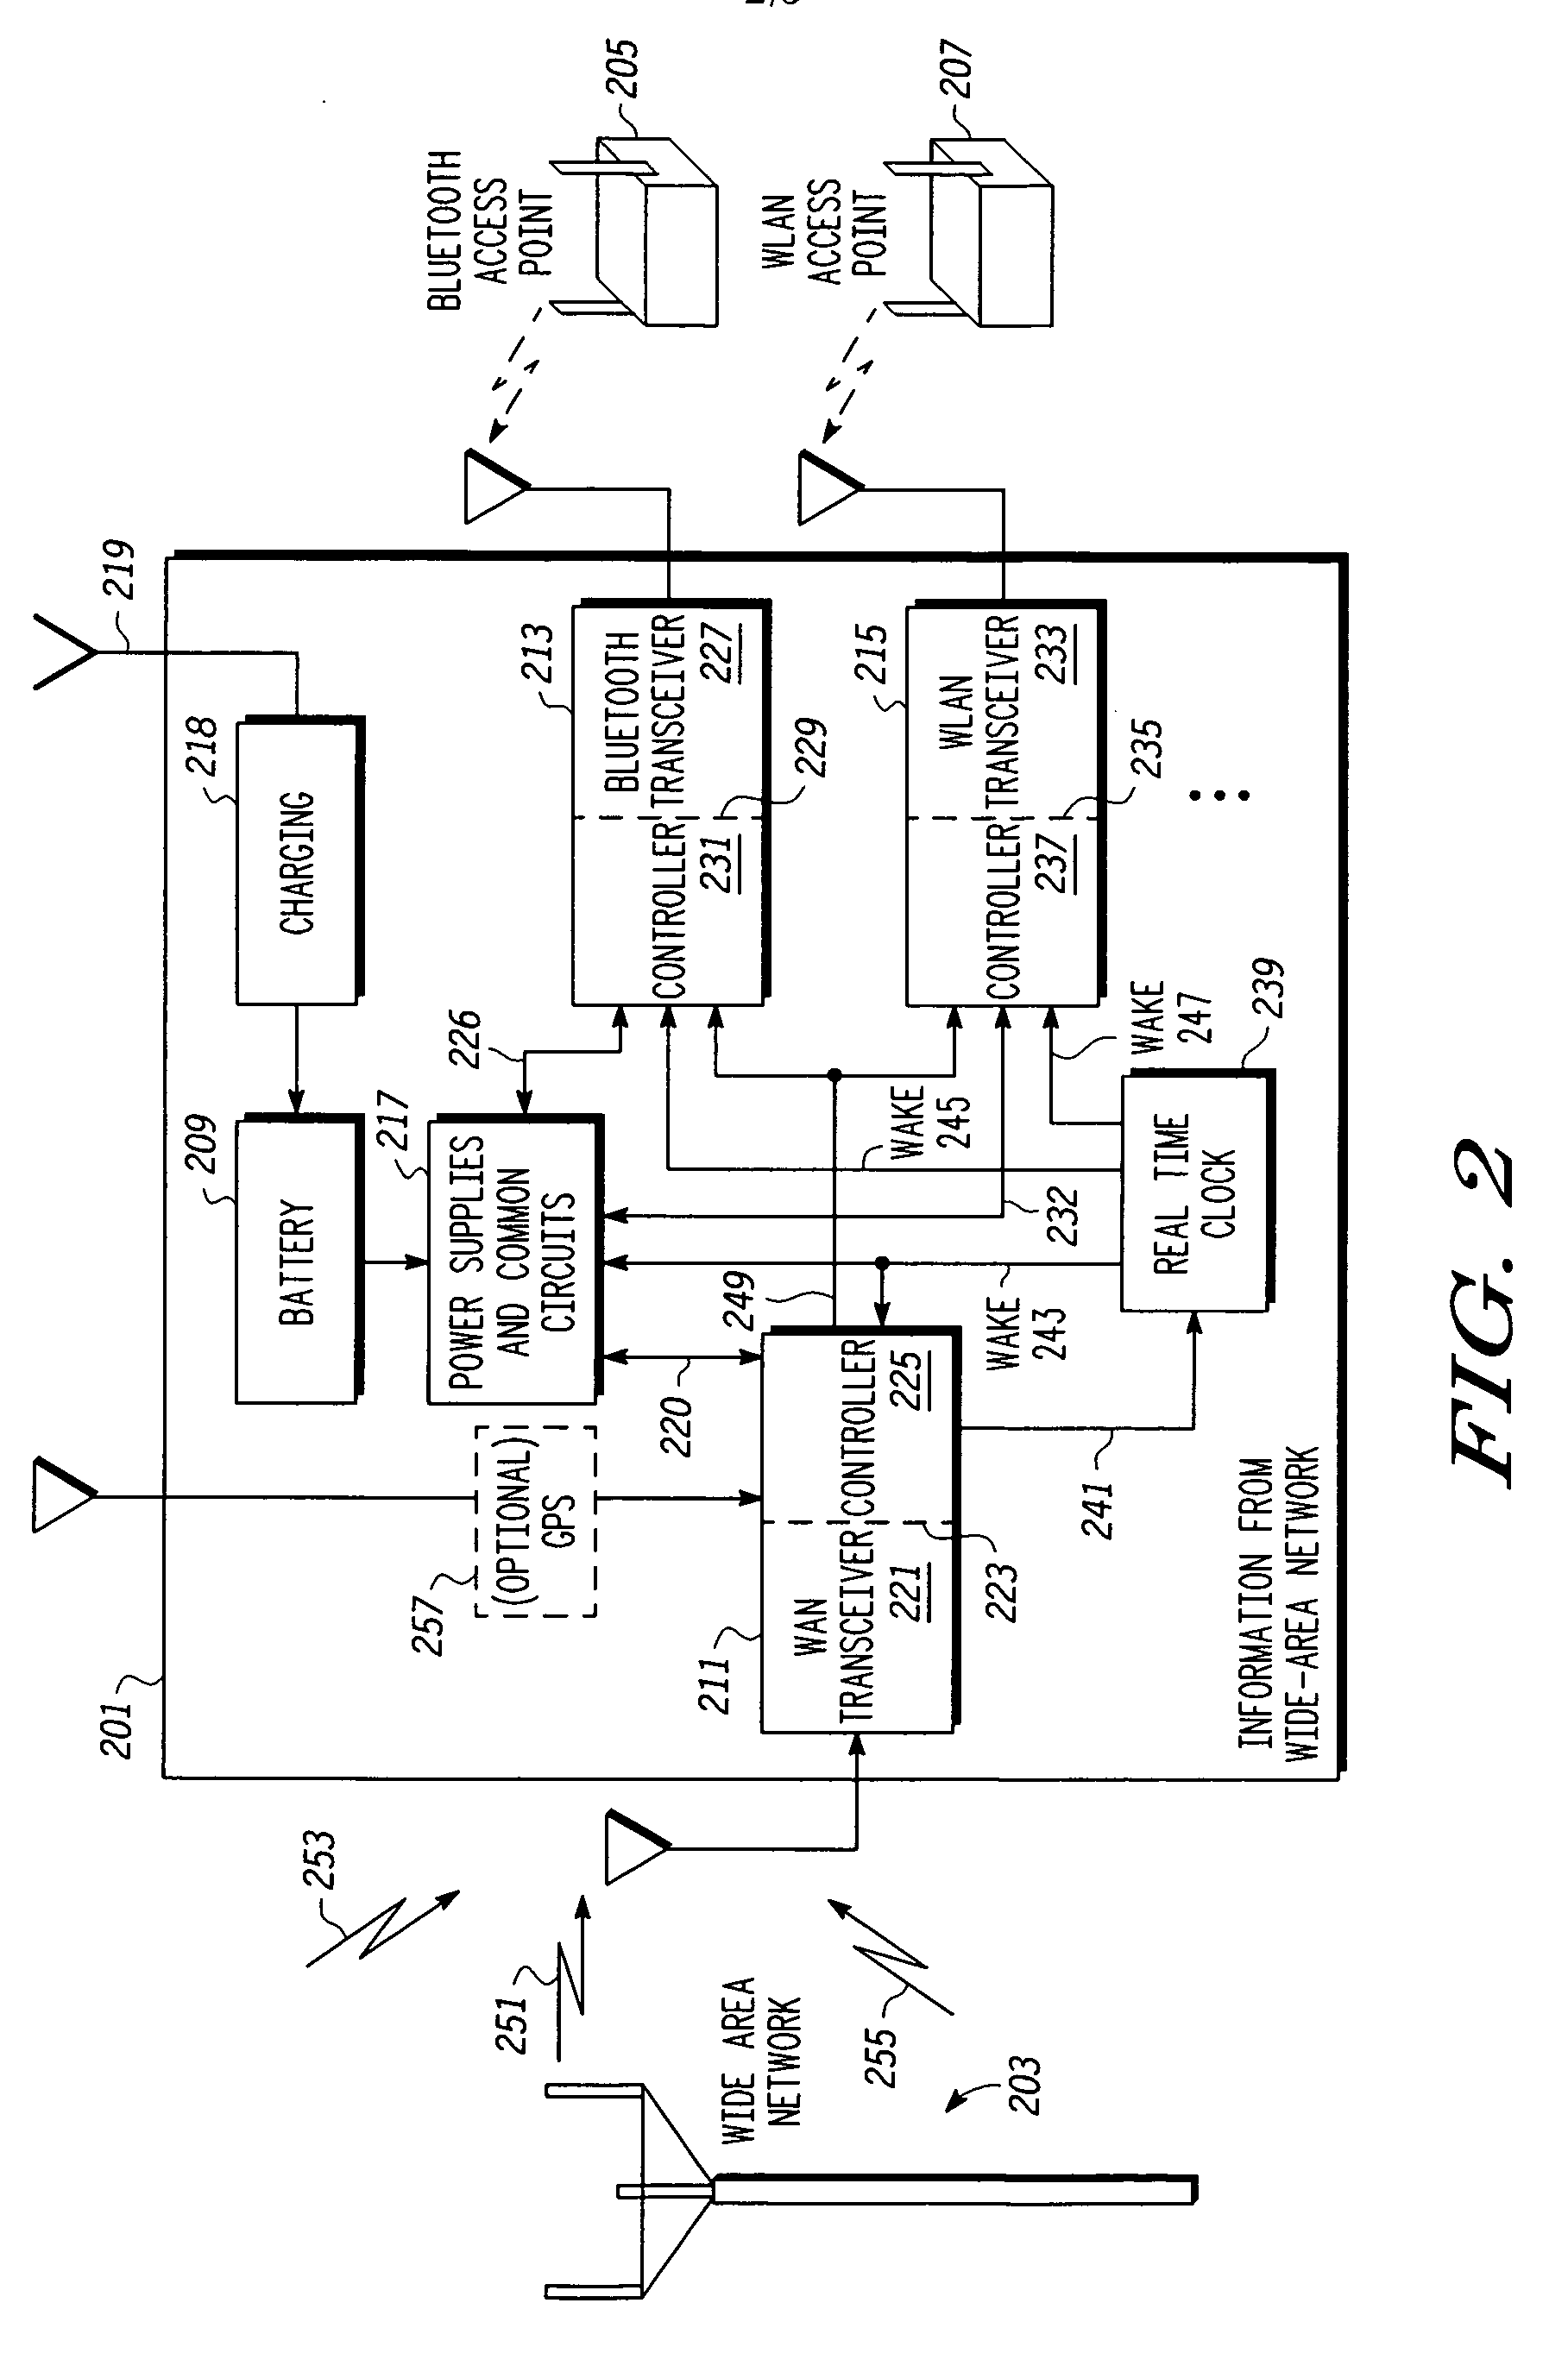 Extending battery life in communication devices having a plurality of receivers